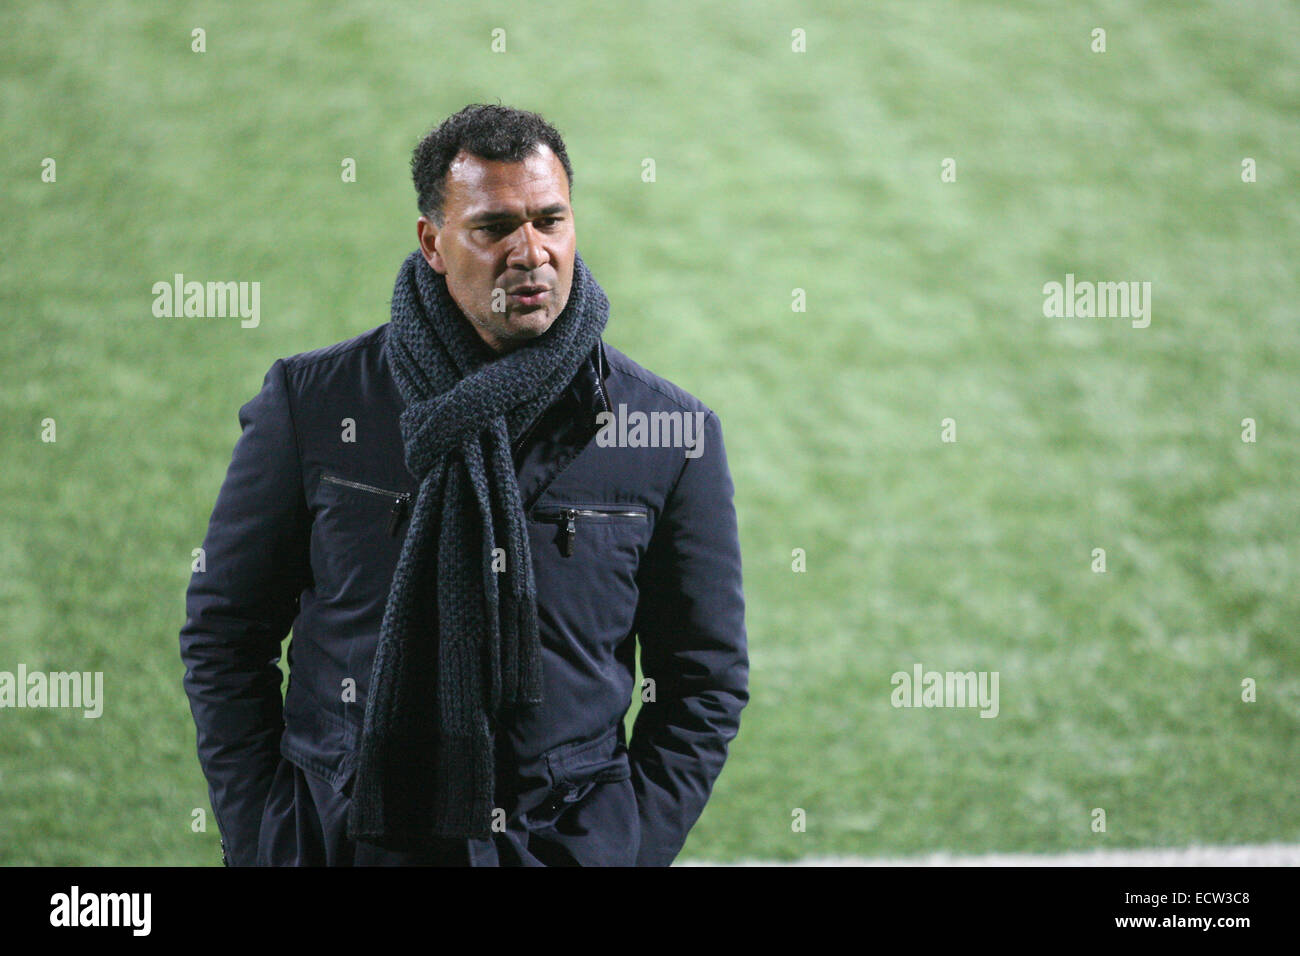 Dutch trainer Ruud Gullit during a match with FC Zenit from St Petersburg at the Terek football stadium in the Chechen capital Grozny, Russia Stock Photo